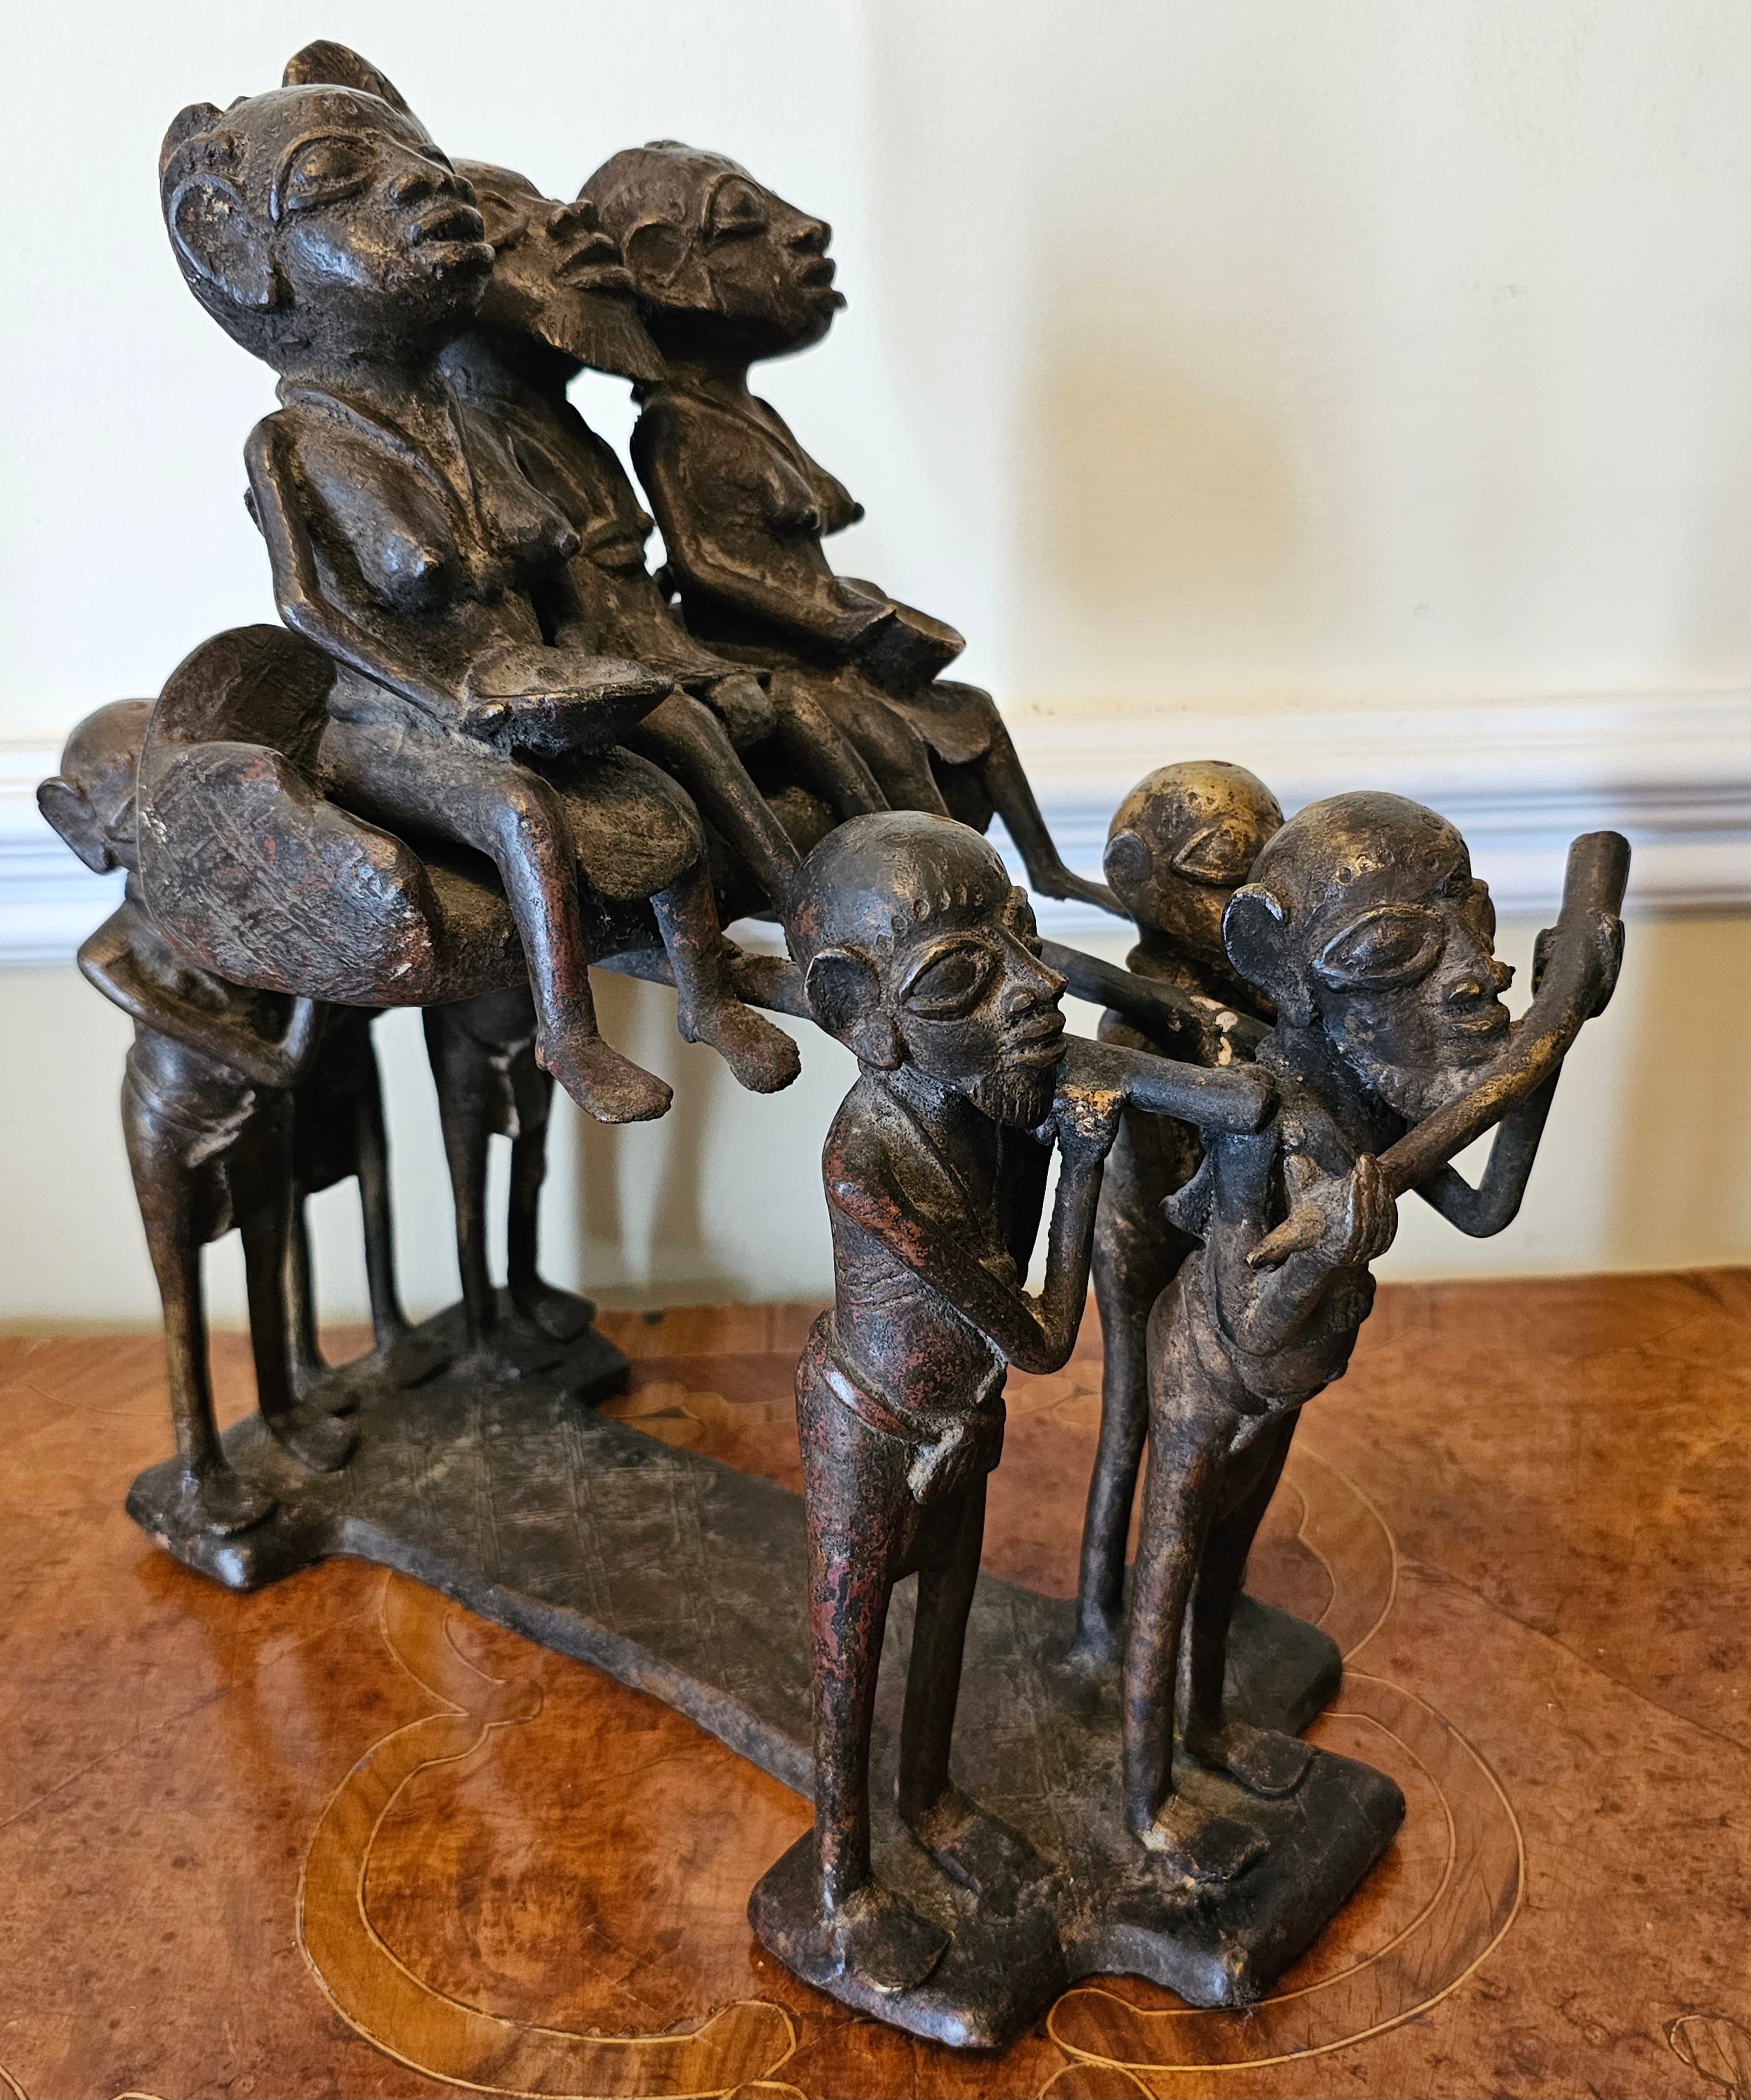 An Early 20th century Bamoun Bronze sculpture. The art of bronze in african art at the service of the King.
The king, a bearded figure, a symbol of wisdom, sits in his carrier chair, accompanied by two of his wives and six other figures. All the